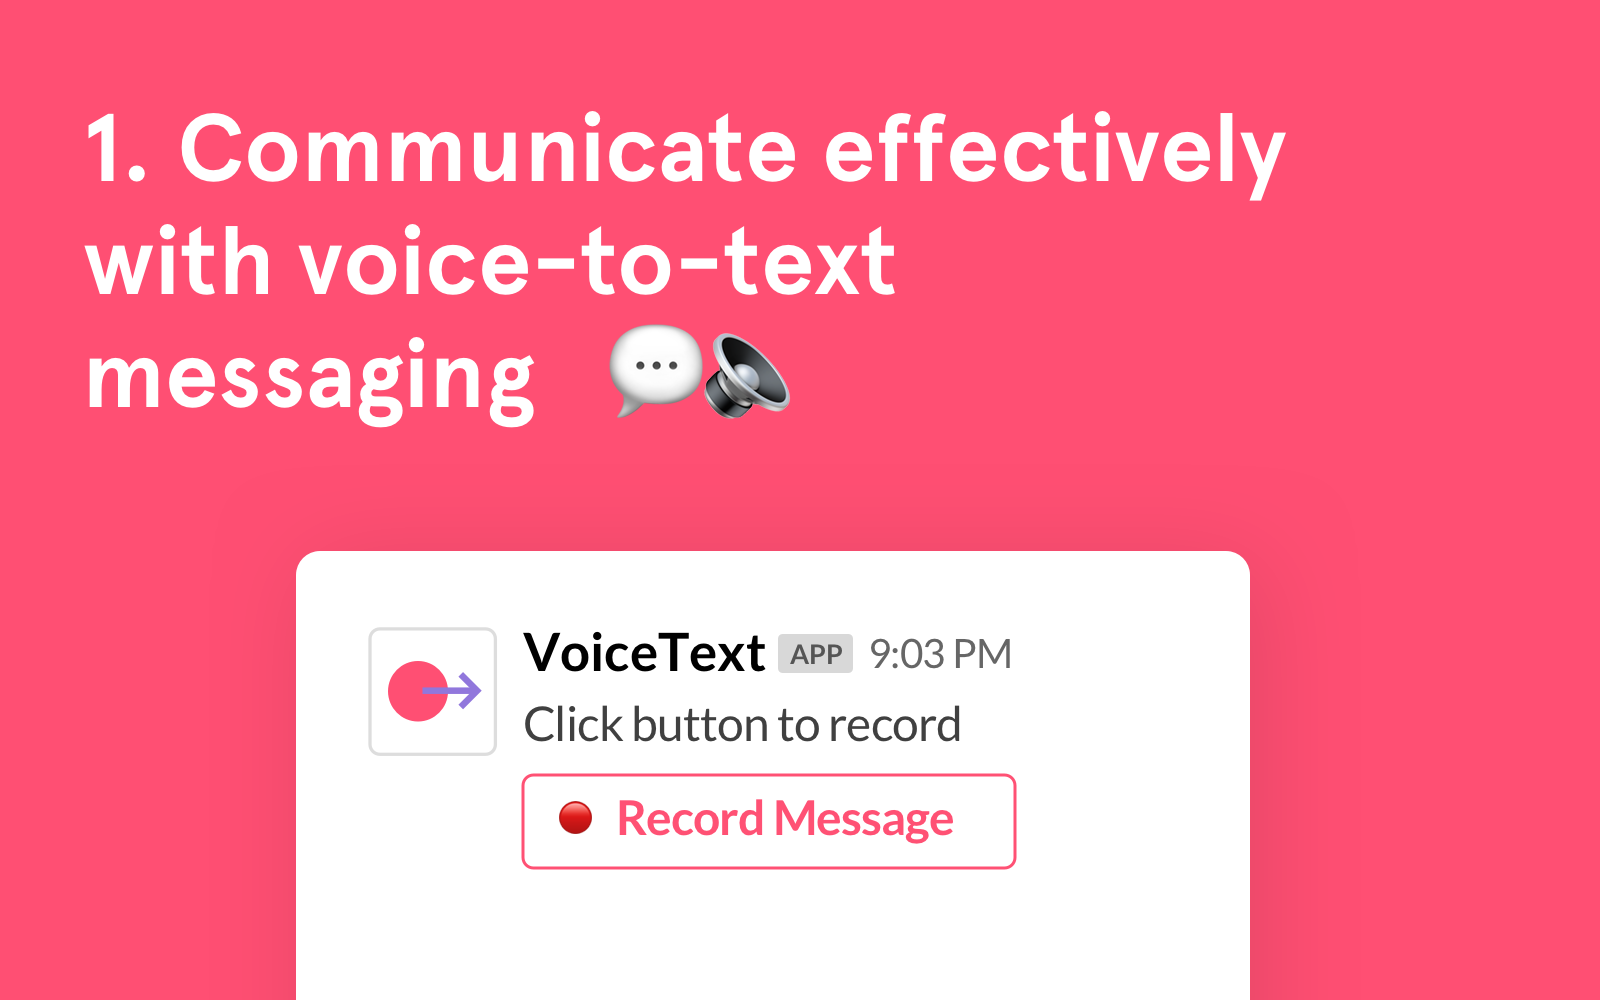 Find detailed information about VoiceText